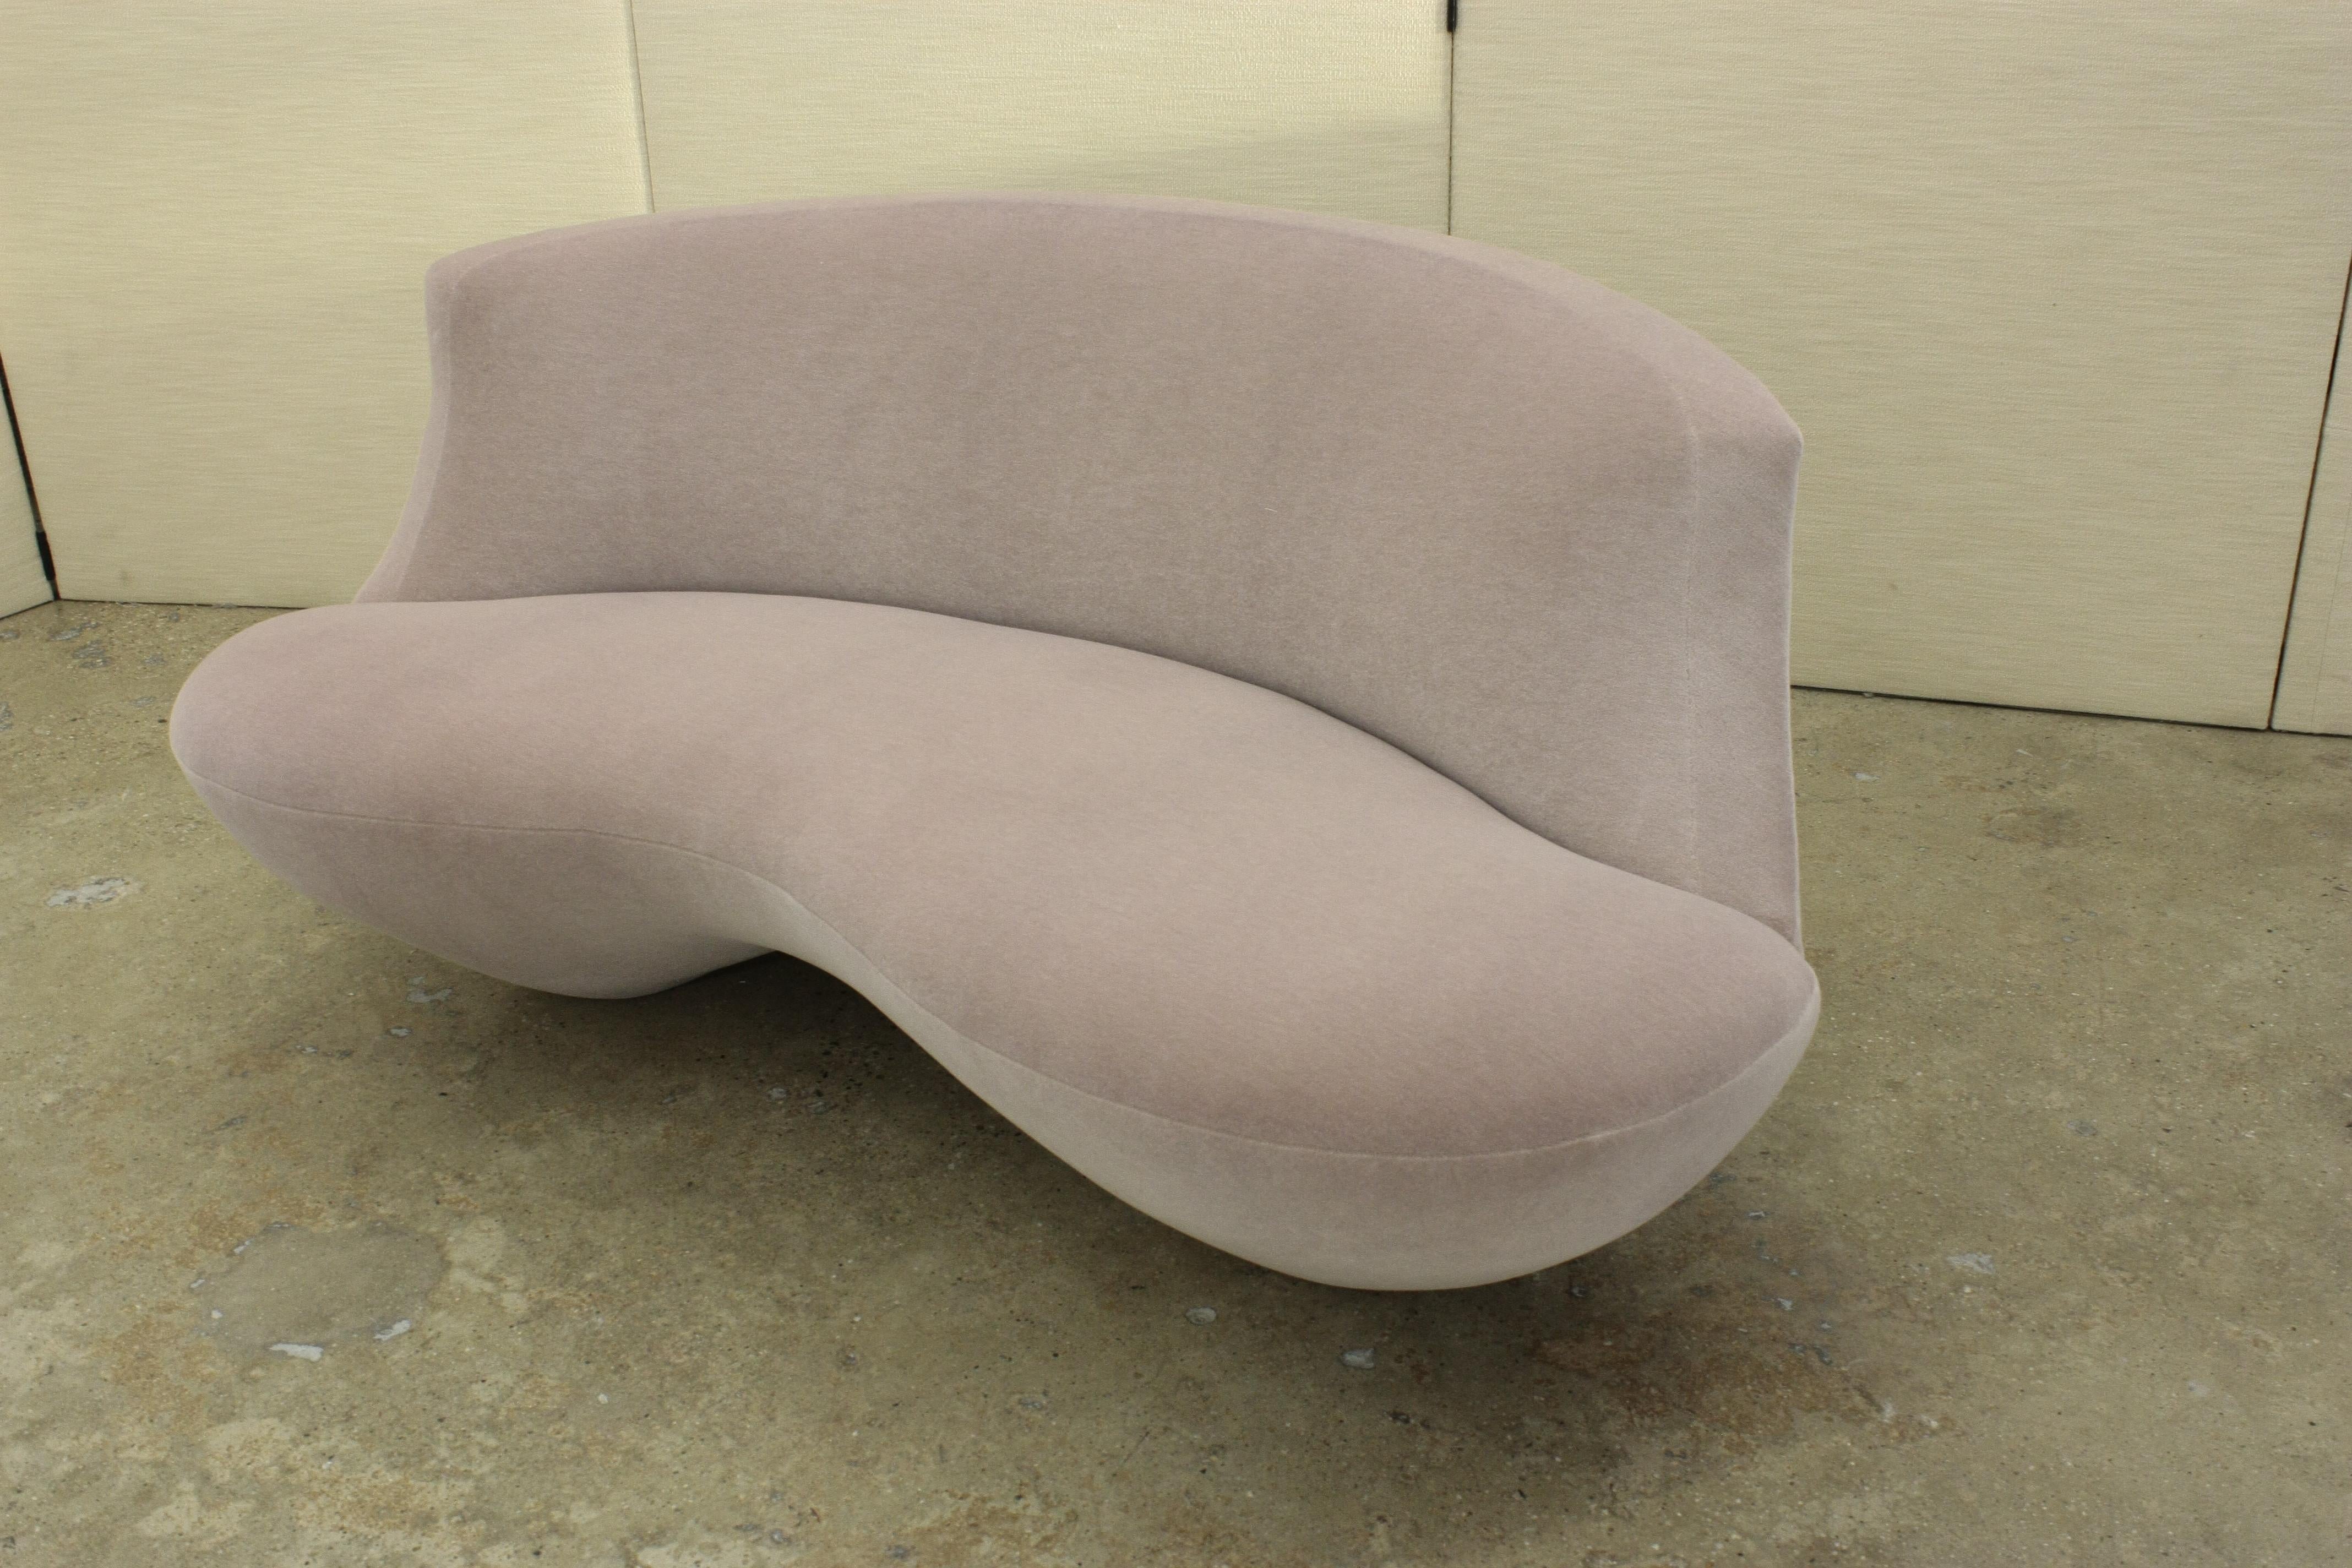 American Elune Sofa Designed by Joshua David Home and Manufactured by Jouffre For Sale